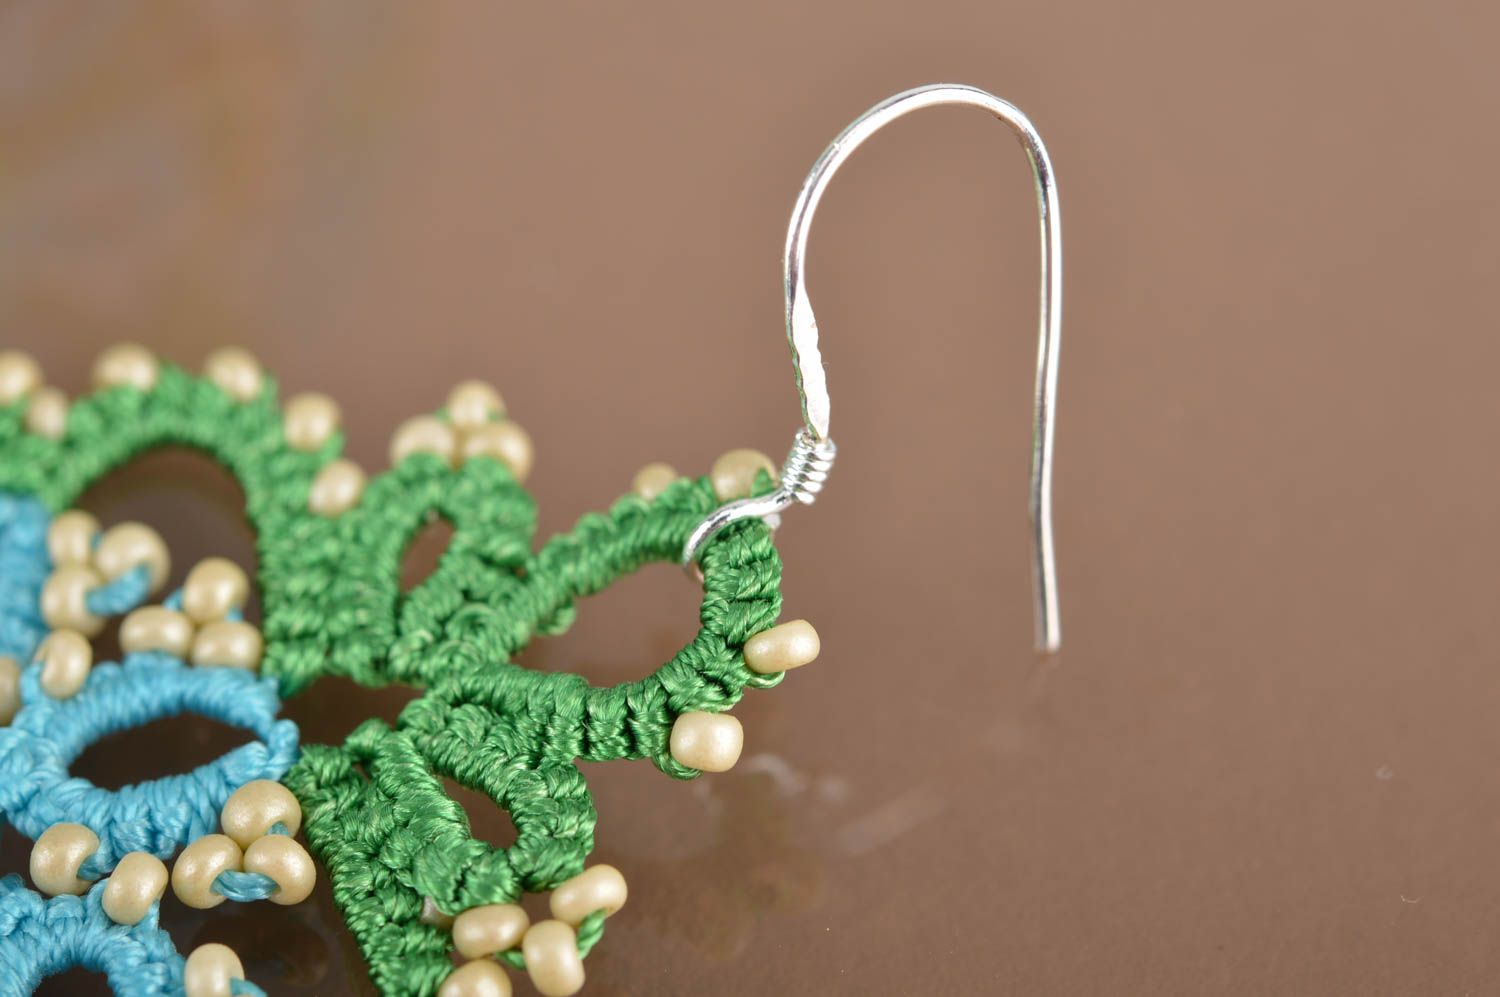 Handmade large lace drop tatted earrings woven of green and blue satin threads photo 4